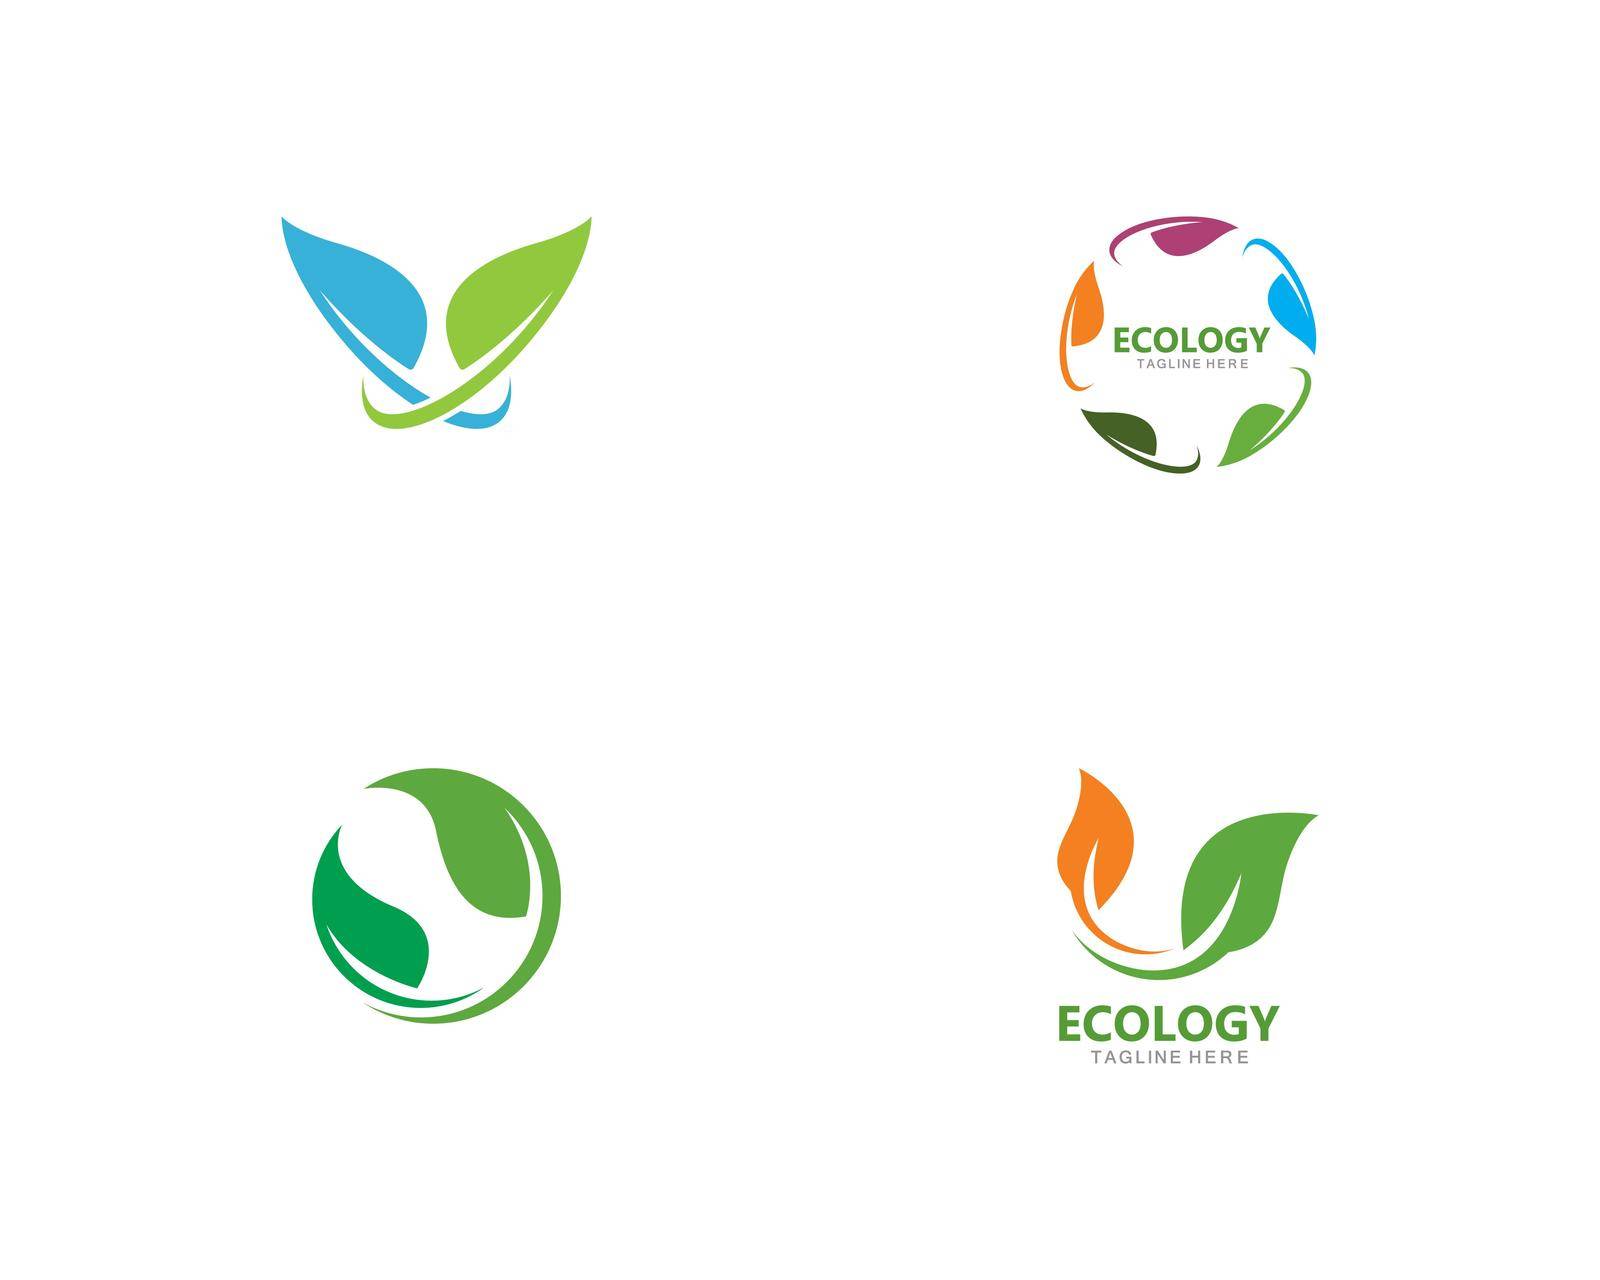 Logos of green leaf ecology nature element vector by kosasihindra55